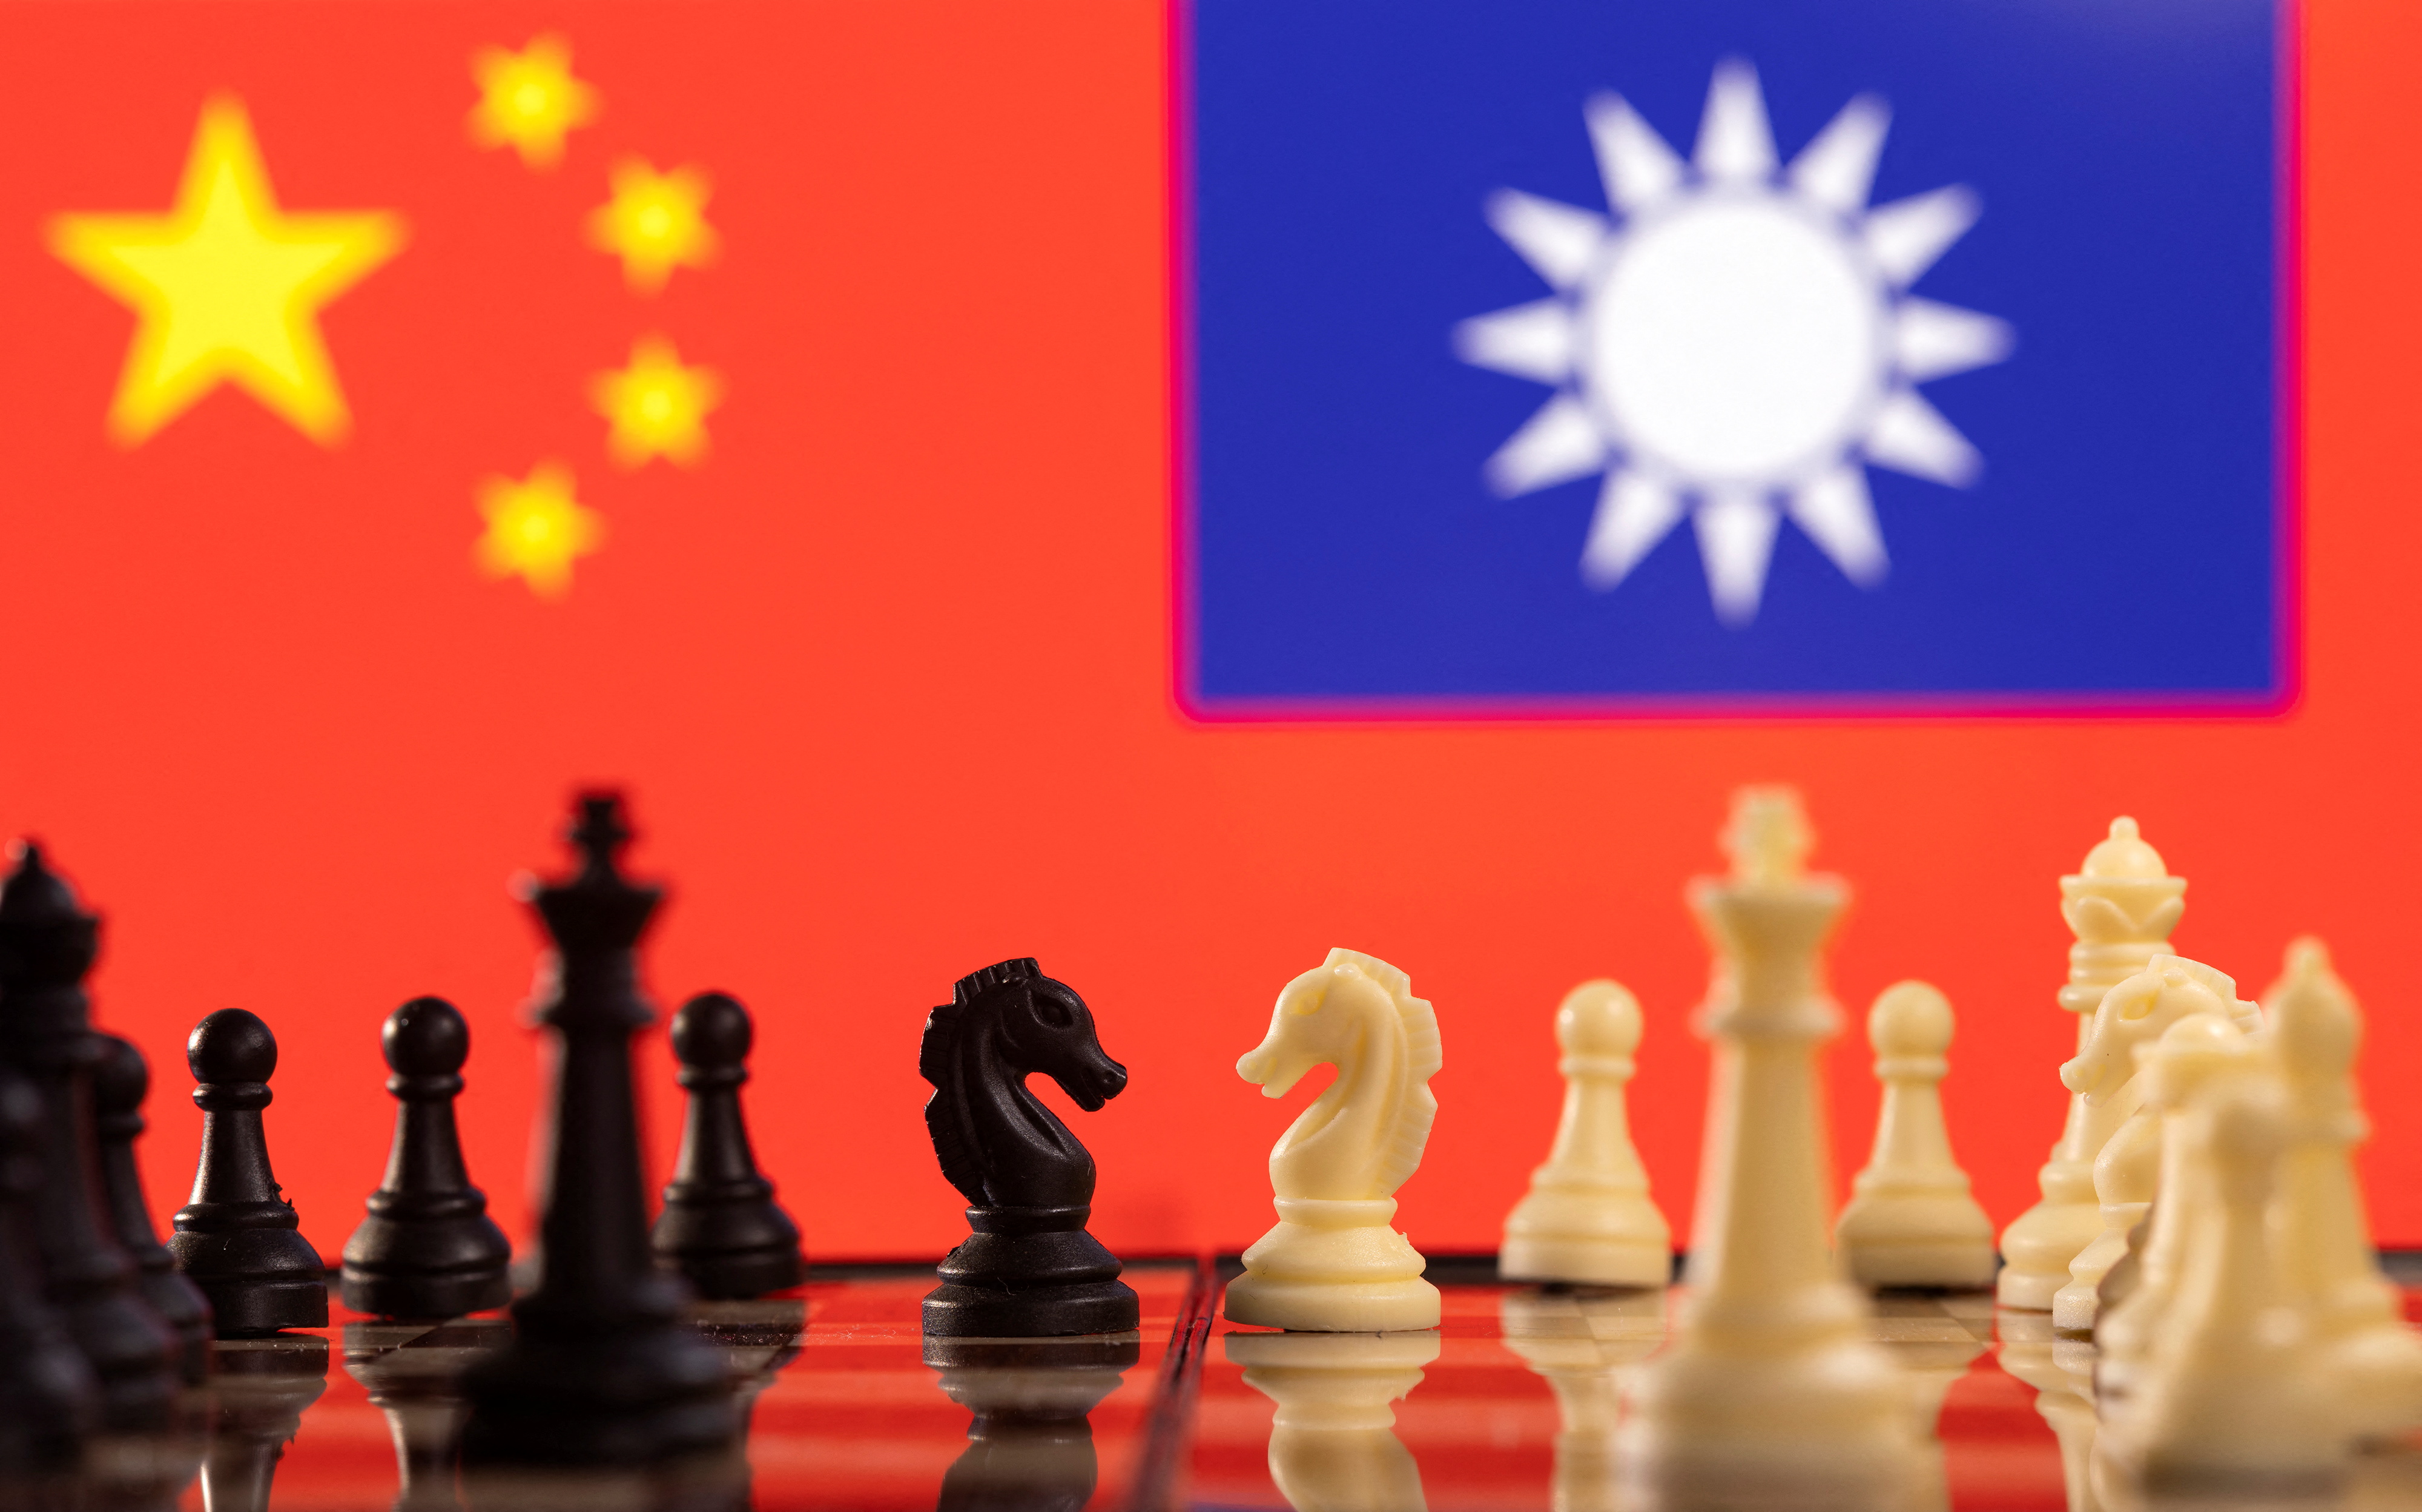 Illustration shows China and Taiwan's flags